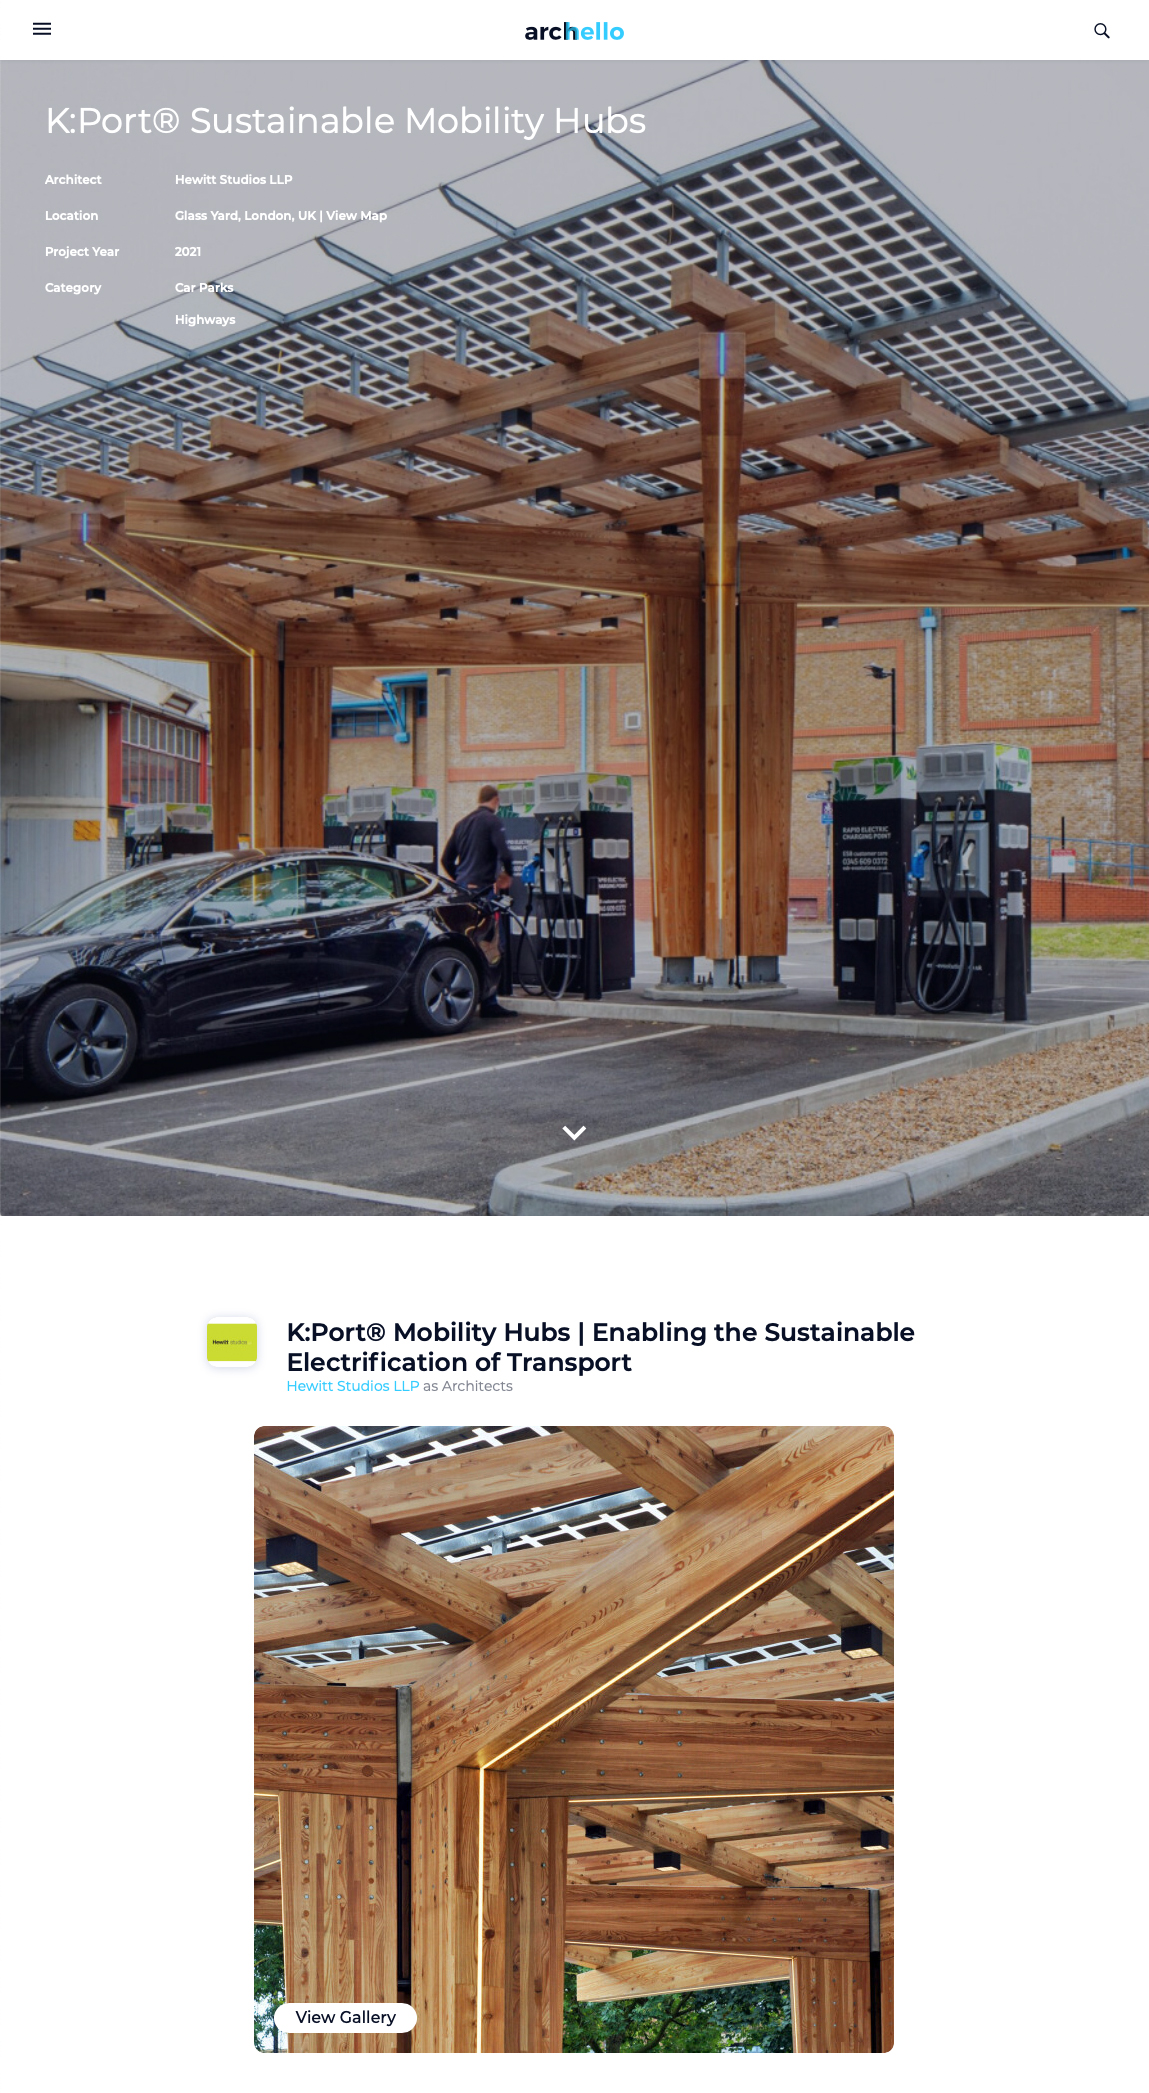 KPort EV Charging Mobility Hub Woolwich